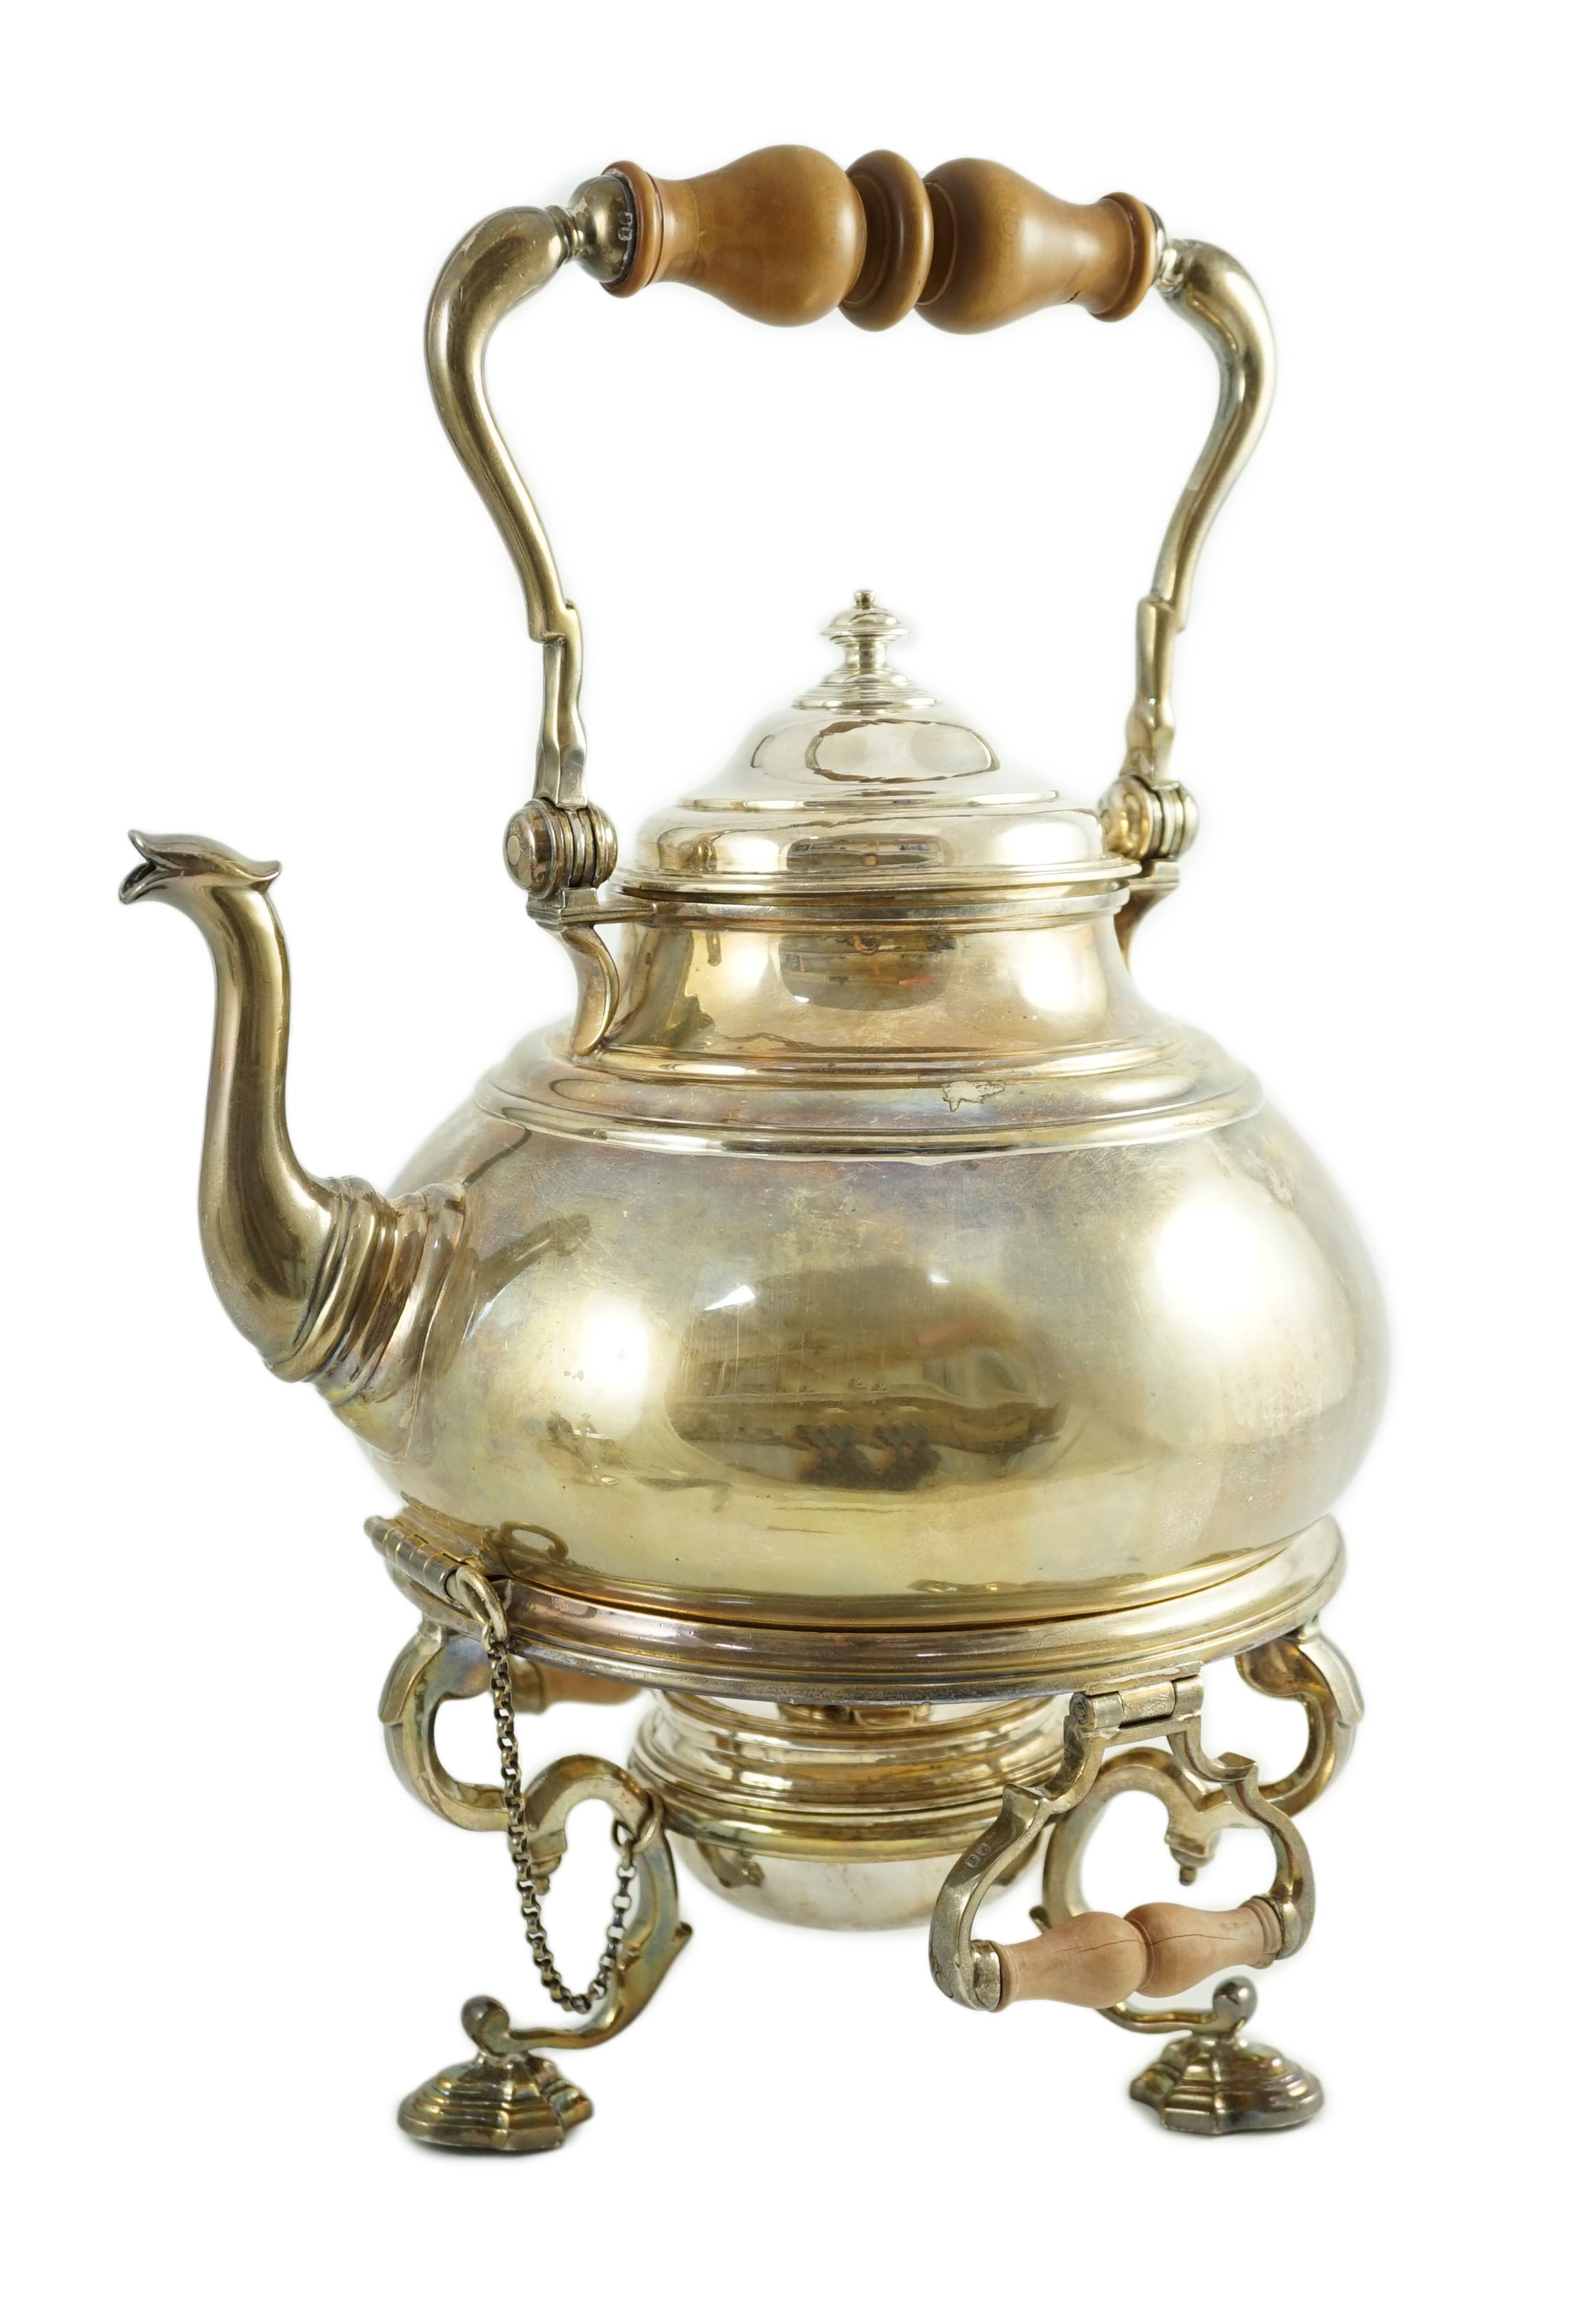 A large George V Britannia standard silver tea kettle on two handled stand, with burner, by Charles & Richard Comyns